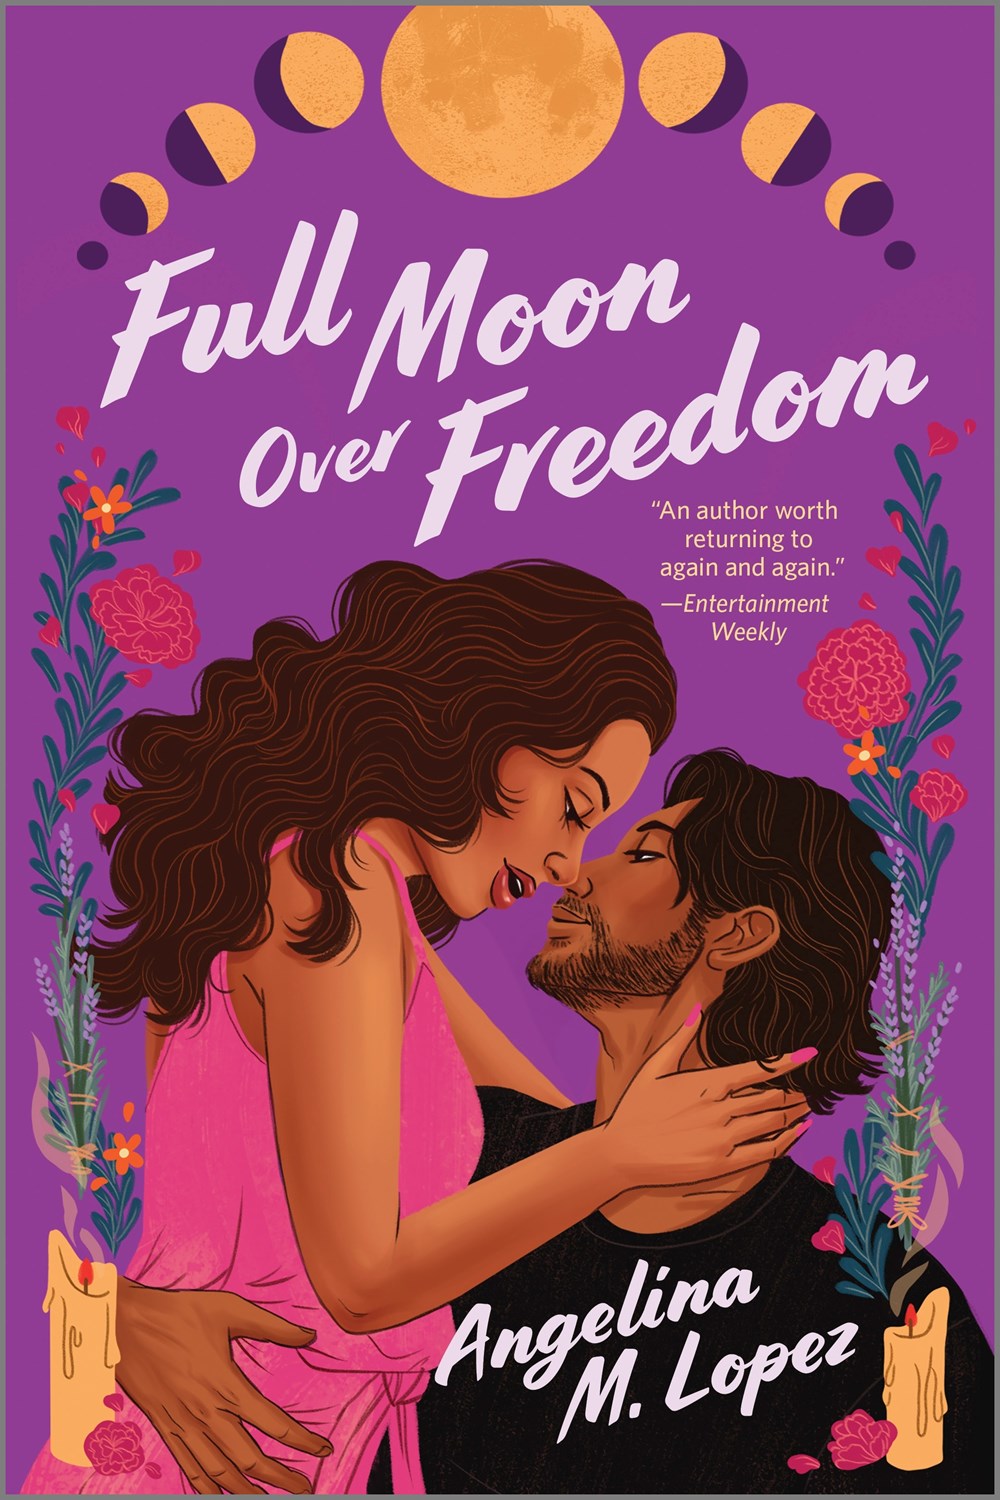 ‘Full Moon over Freedom’ by Angelina M. Lopez | Romance Pick of the Month